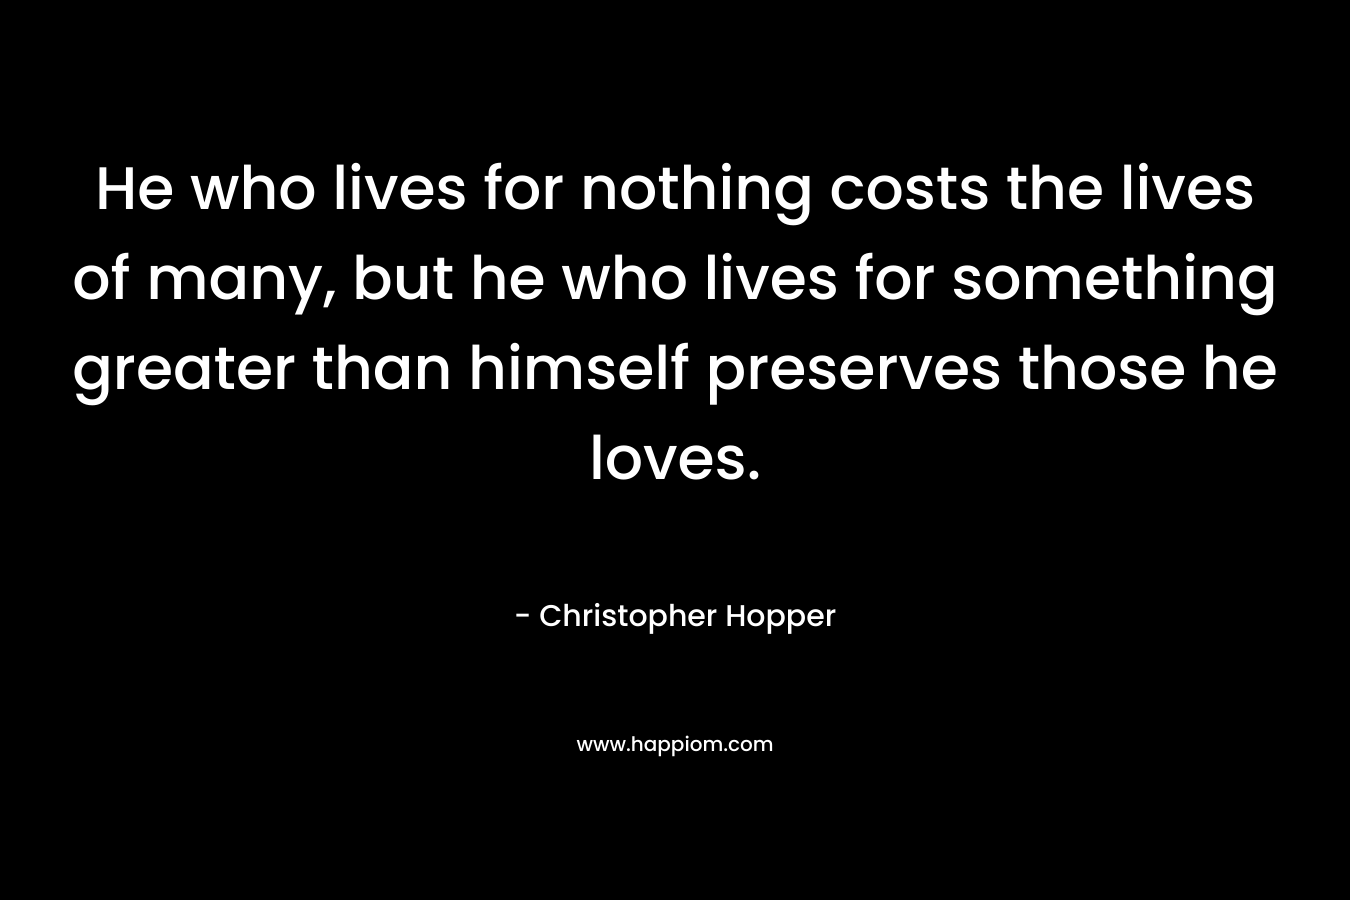 He who lives for nothing costs the lives of many, but he who lives for something greater than himself preserves those he loves. – Christopher Hopper